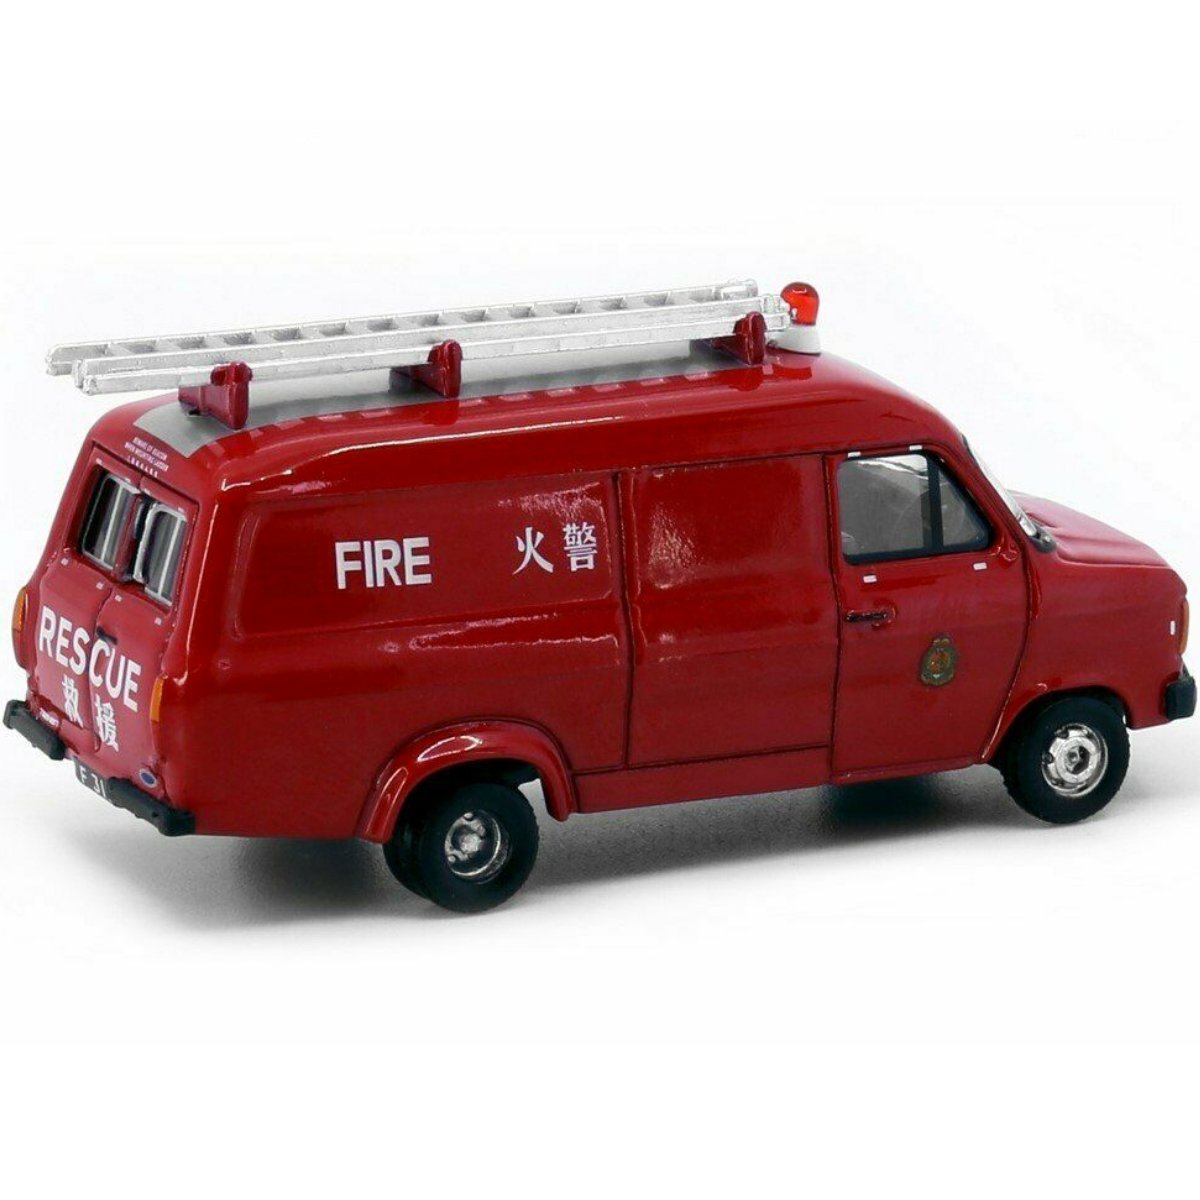 Tiny Models 1980s Light Rescue Unit F311 HKFSD (1:76 Scale) - Phillips Hobbies